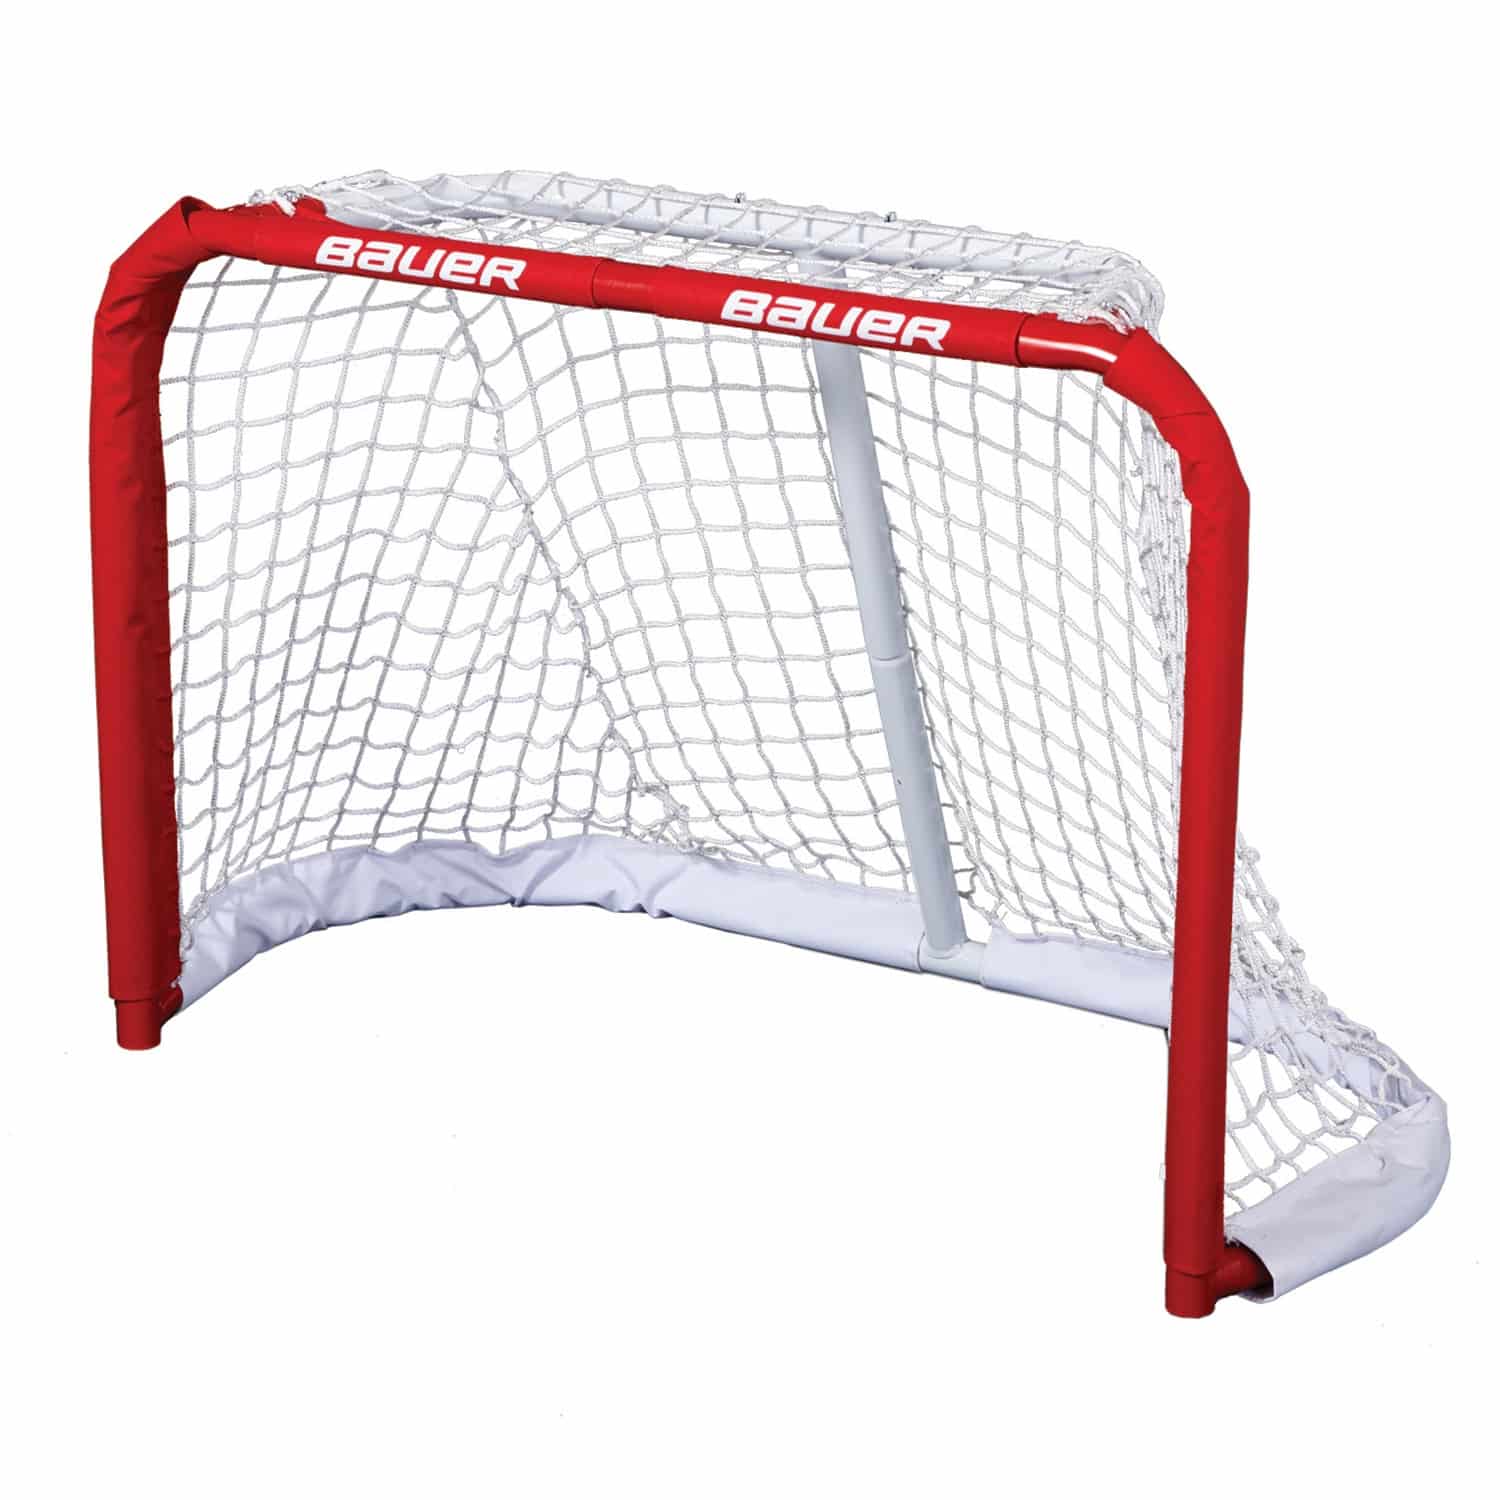 ACC Tor Bauer Pro Style Goal 36" 91 x 61 cm